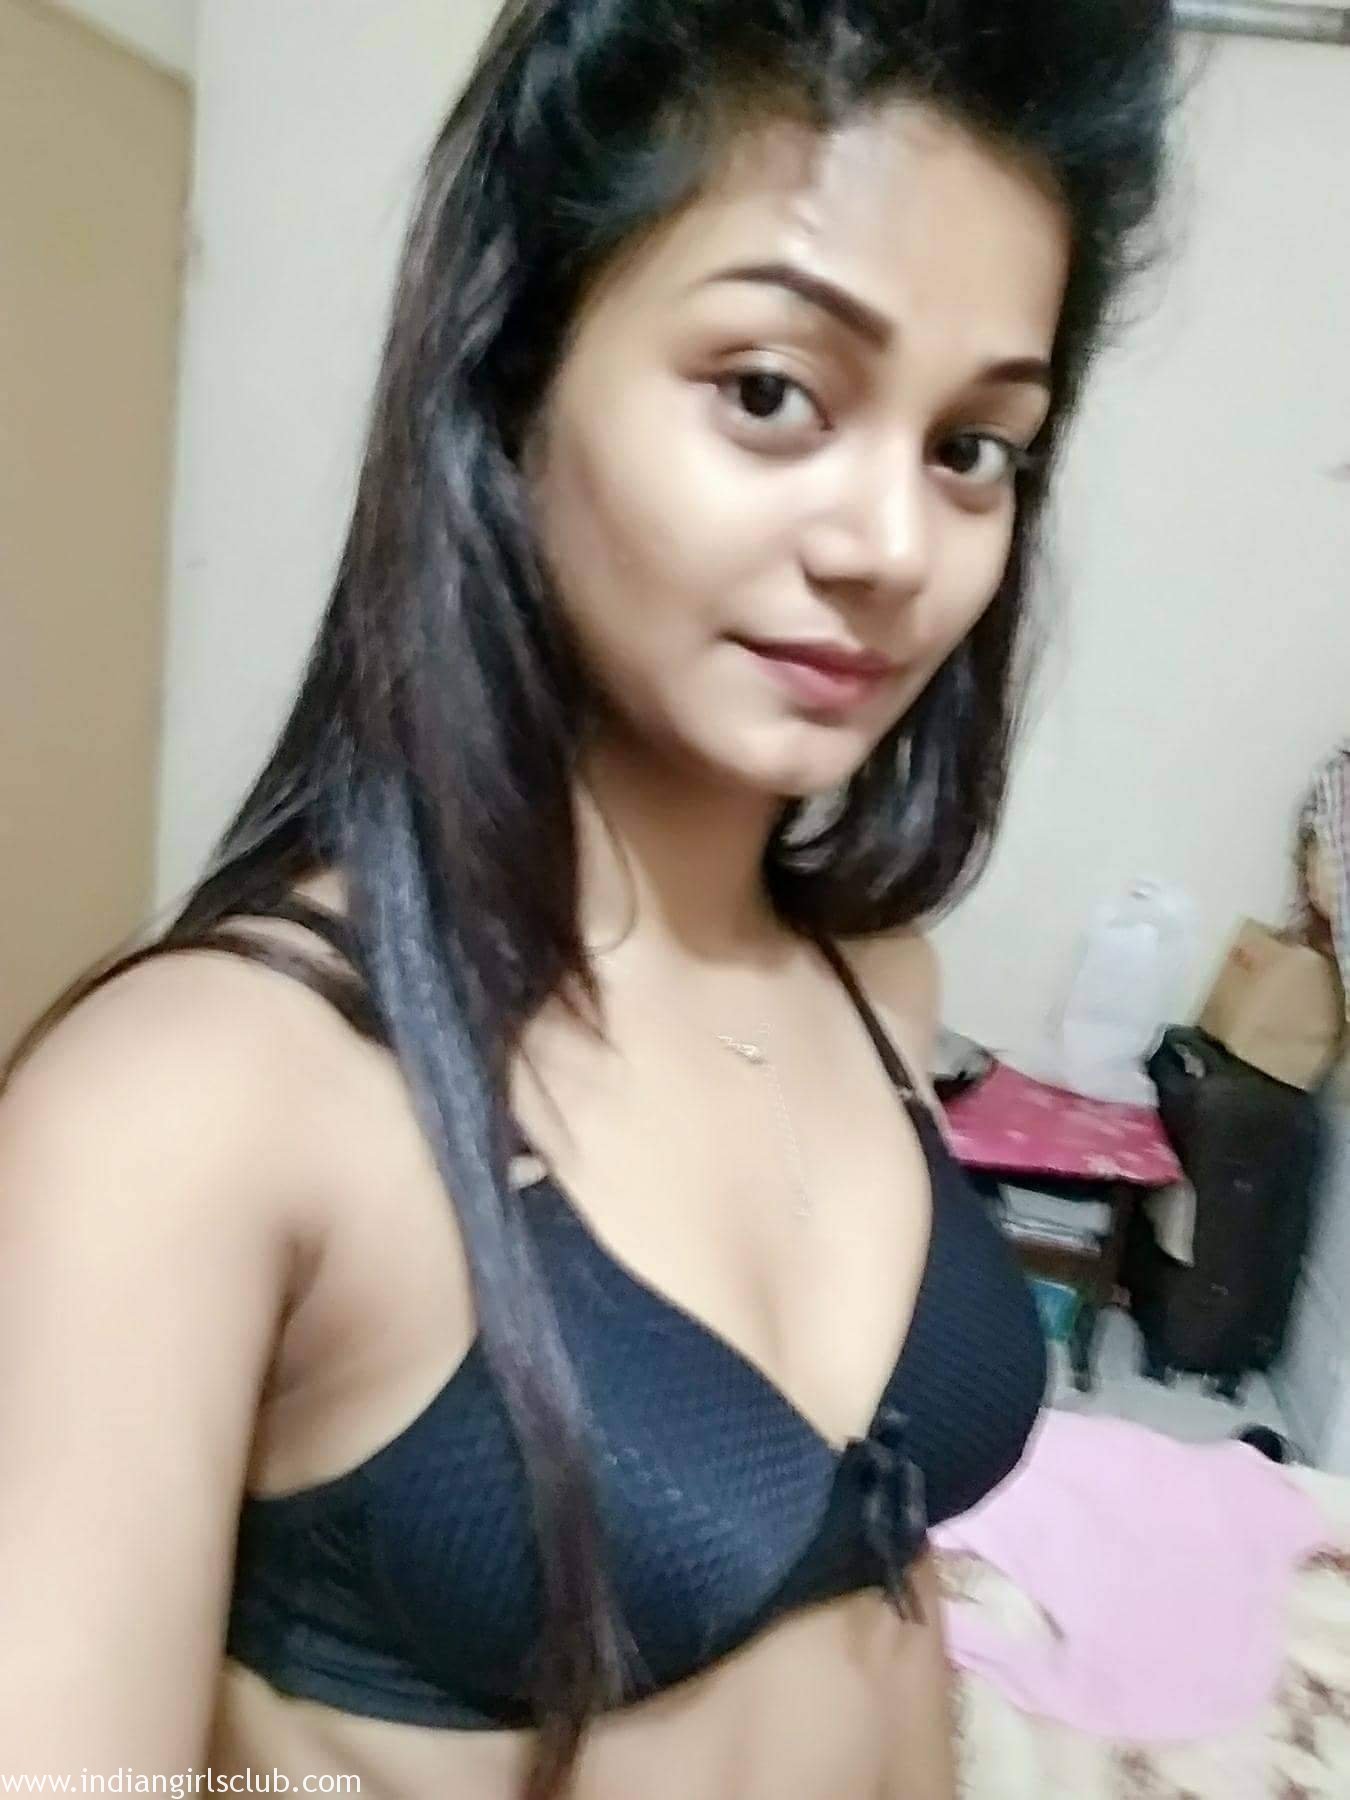 Bra Sex Indian College - Indian College Girl Hot Sex With Her Lover - Indian Girls Club